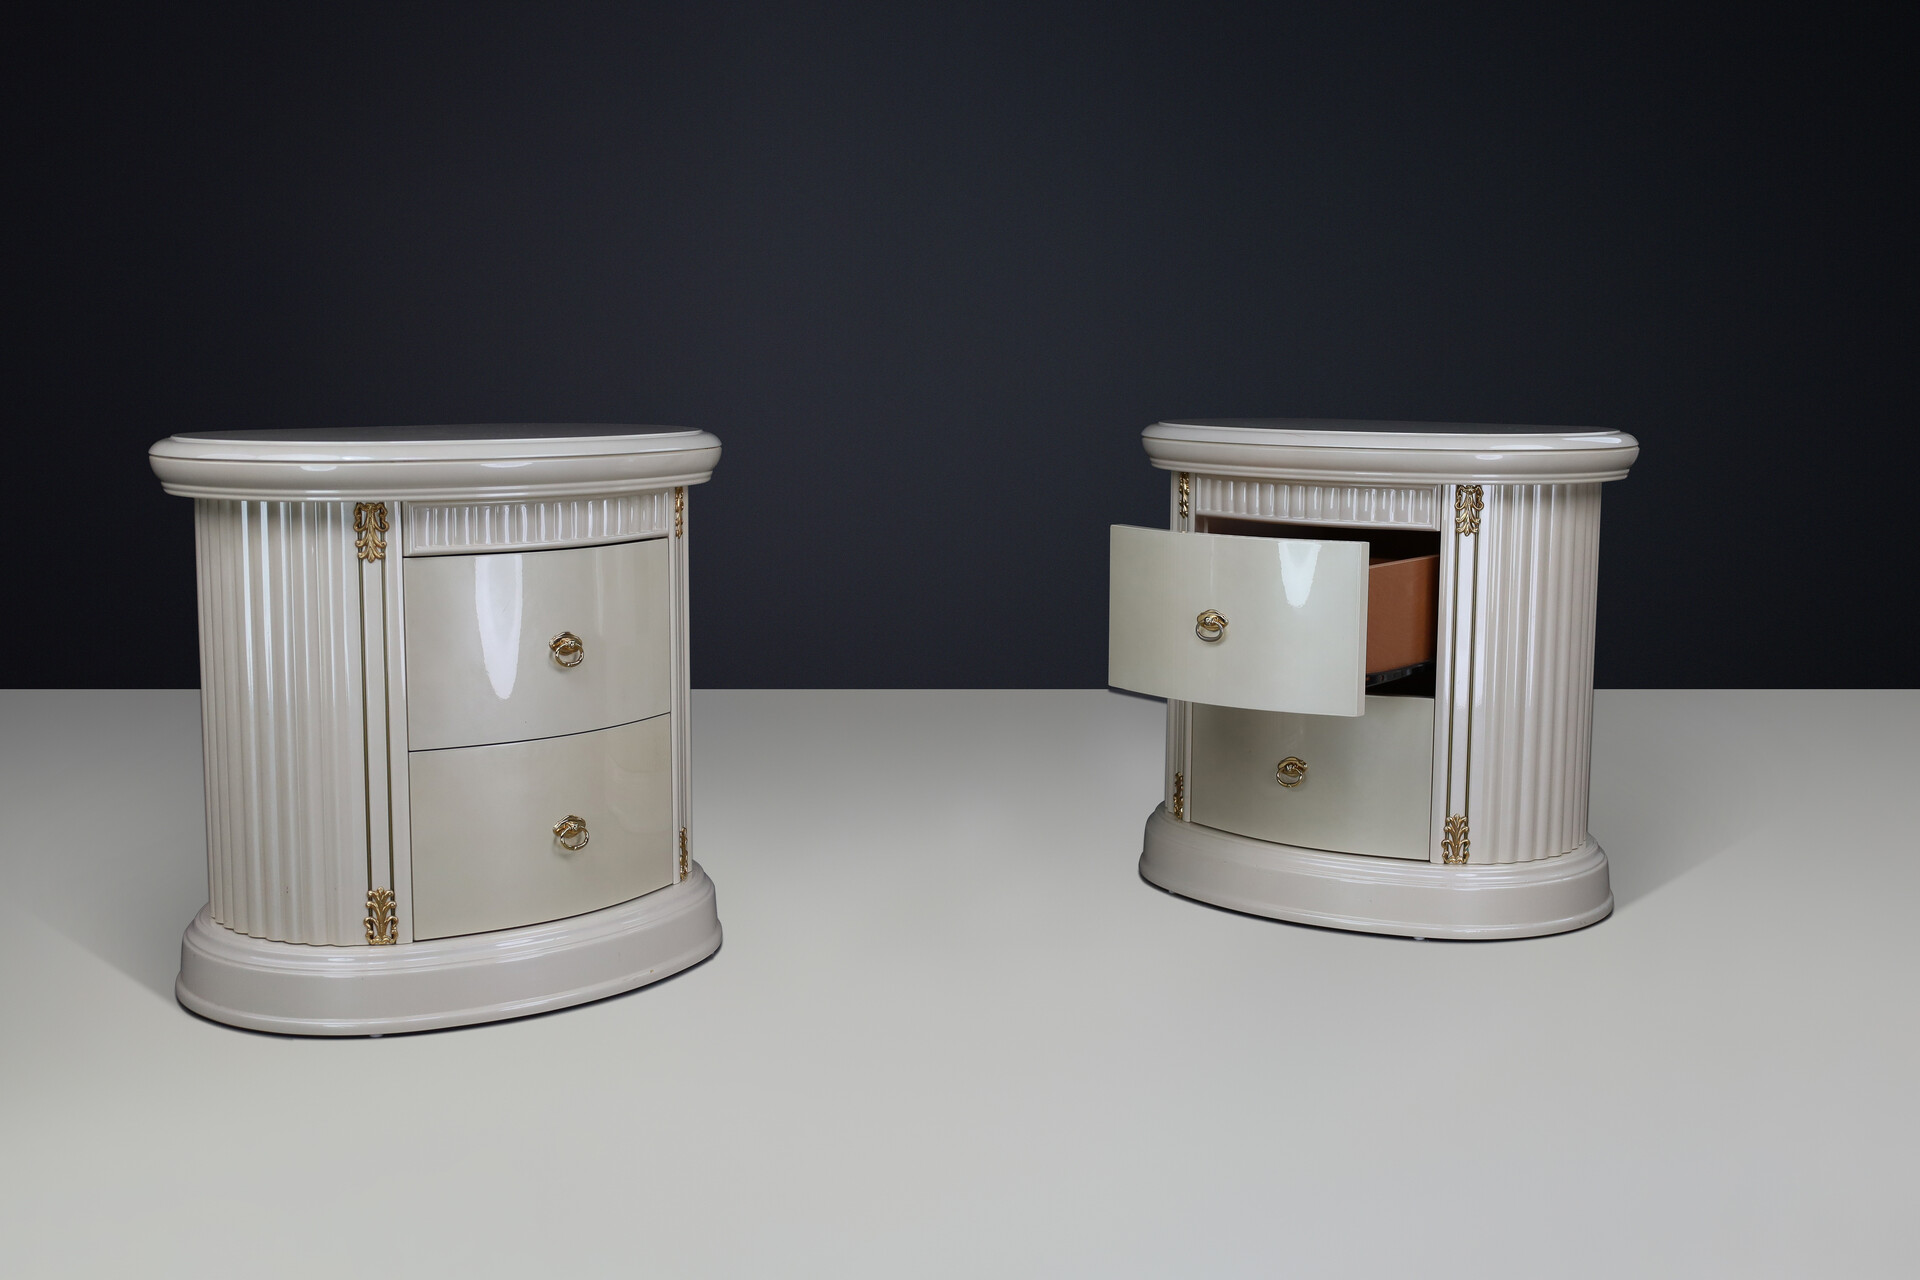 Neoclassical Laquered Cabinets with drawers, Italy 1980s Late-20th century